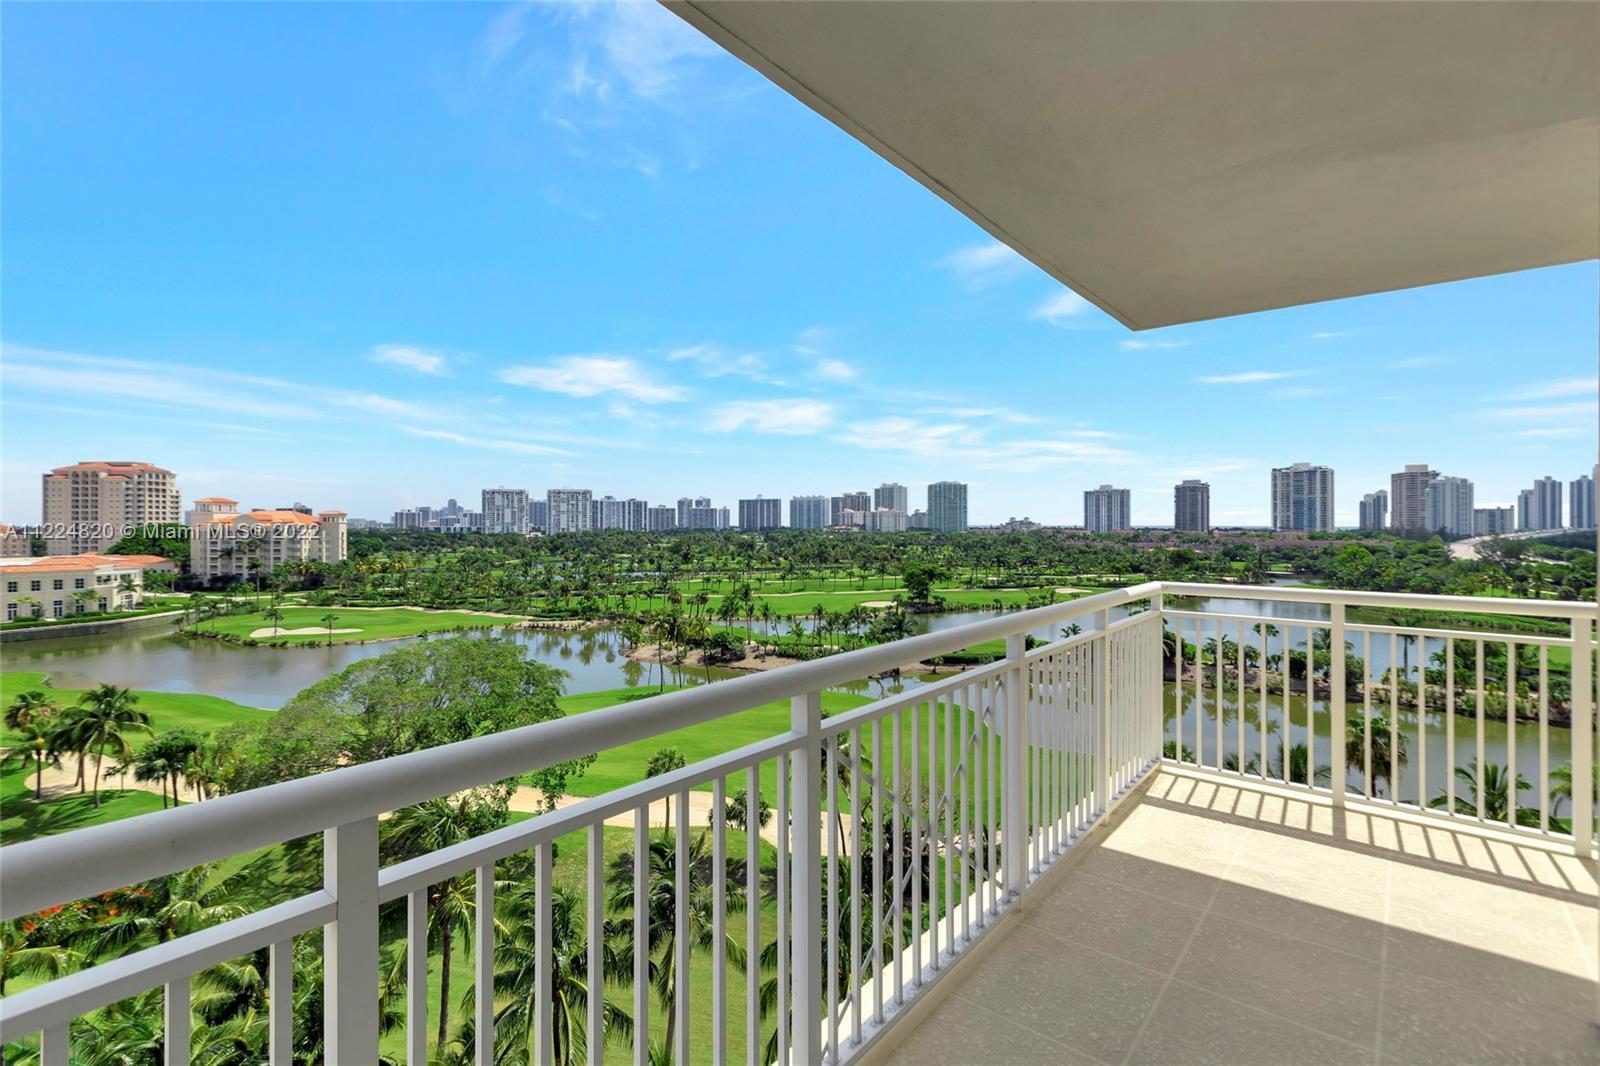 Take in beautiful views from your balcony at Turnberry On The Green! This two bedroom, two bathroom 